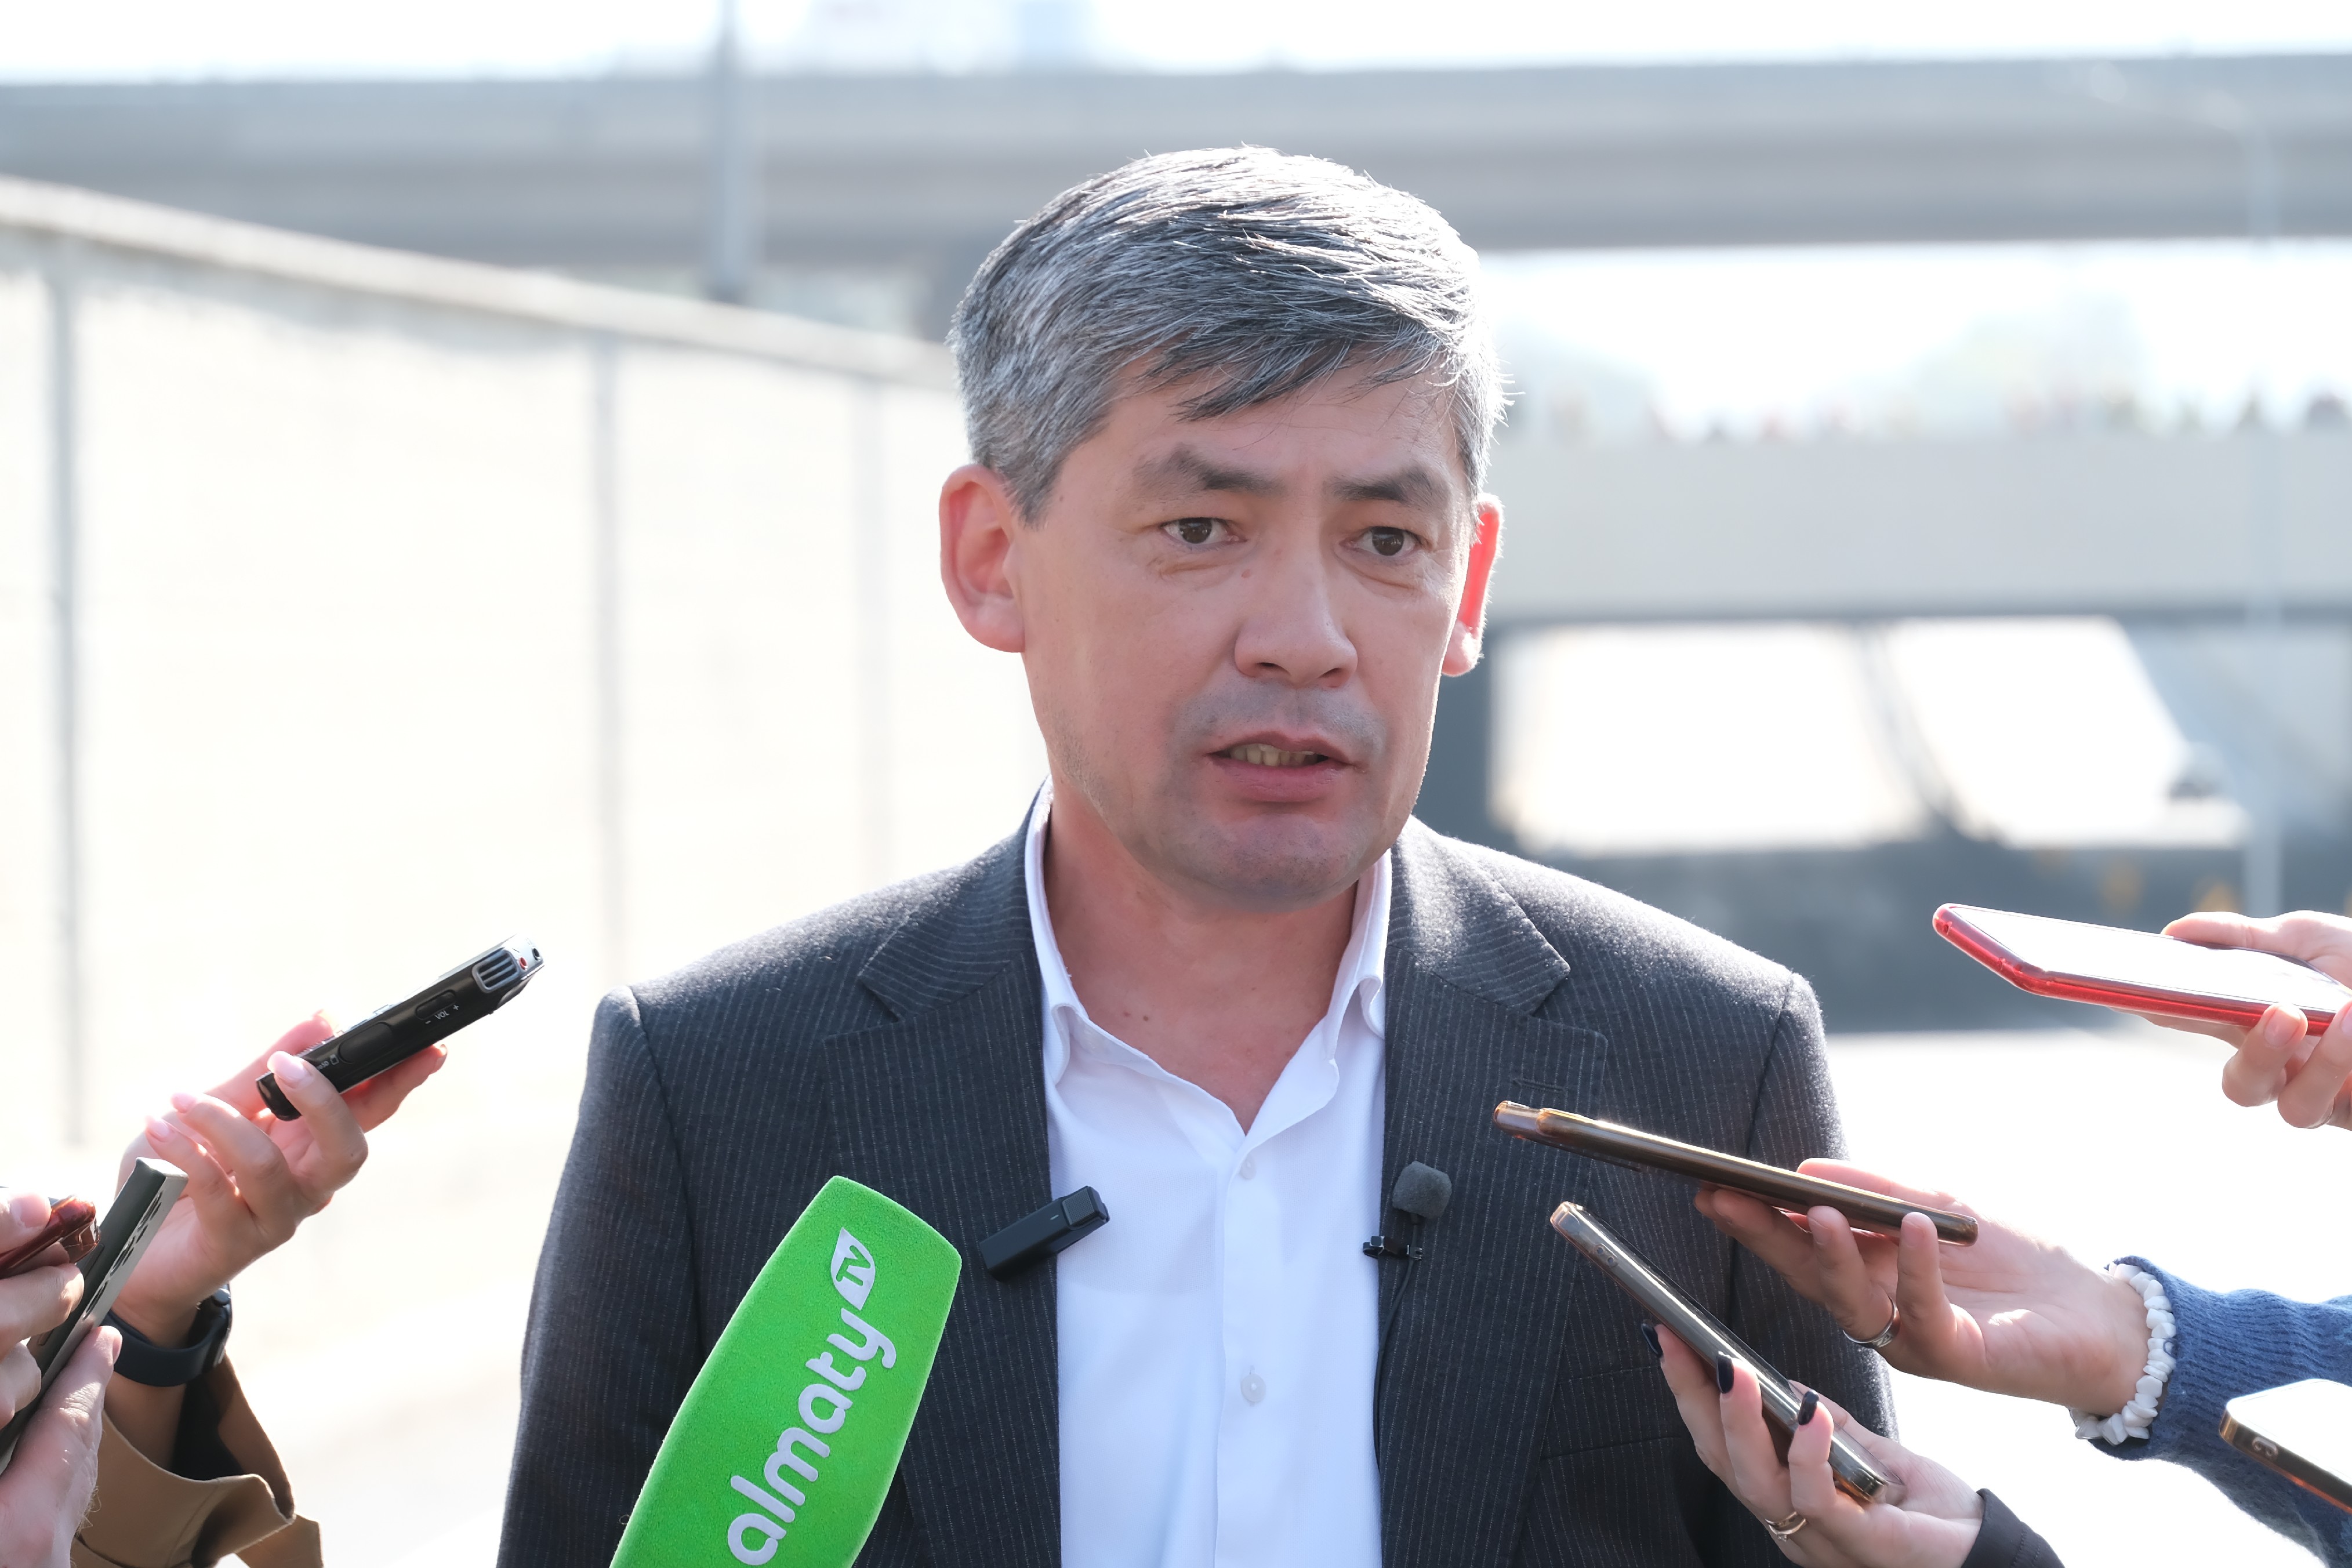 A new transport interchange on the Kuldzhinsky highway in Almaty will increase the capacity of vehicles by 5 times